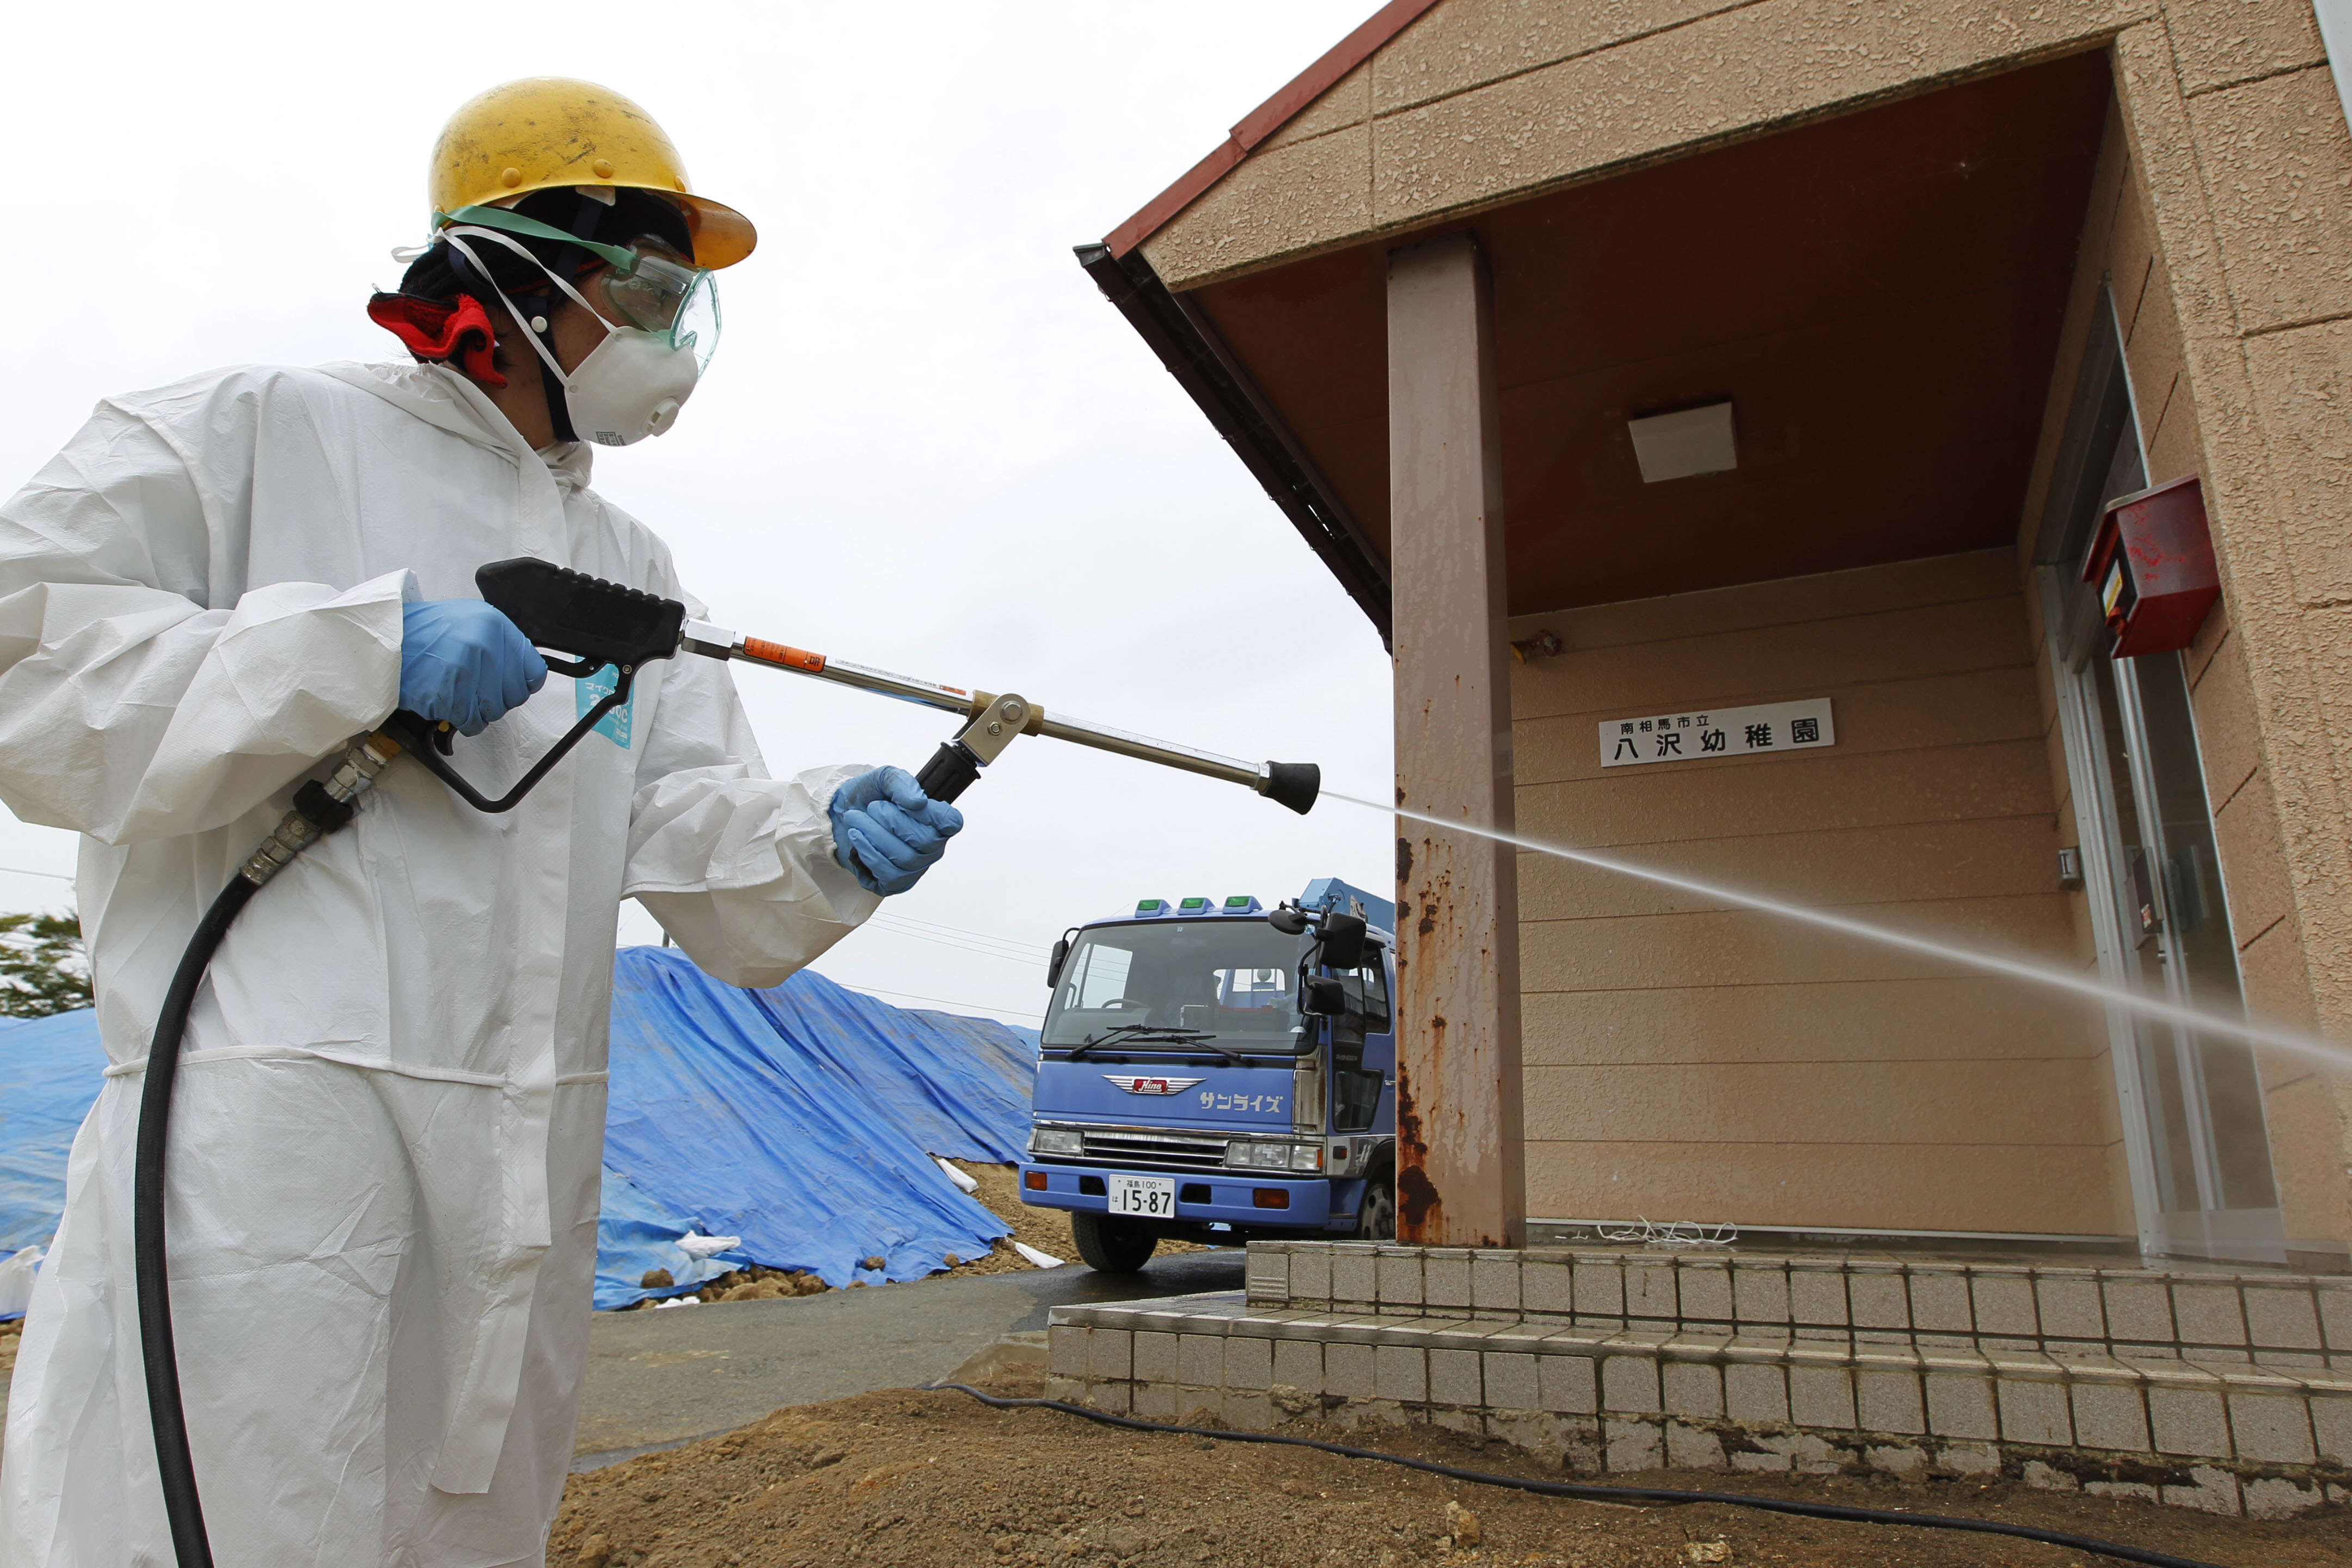 A worker uses a pressure hose in an attempt to wash radioactive particles off the exterior of a kindergarten in Minamisoma, about 20 km away from the severely damaged Fukushima No. 1 nuclear power plant, in August 2011. | AP